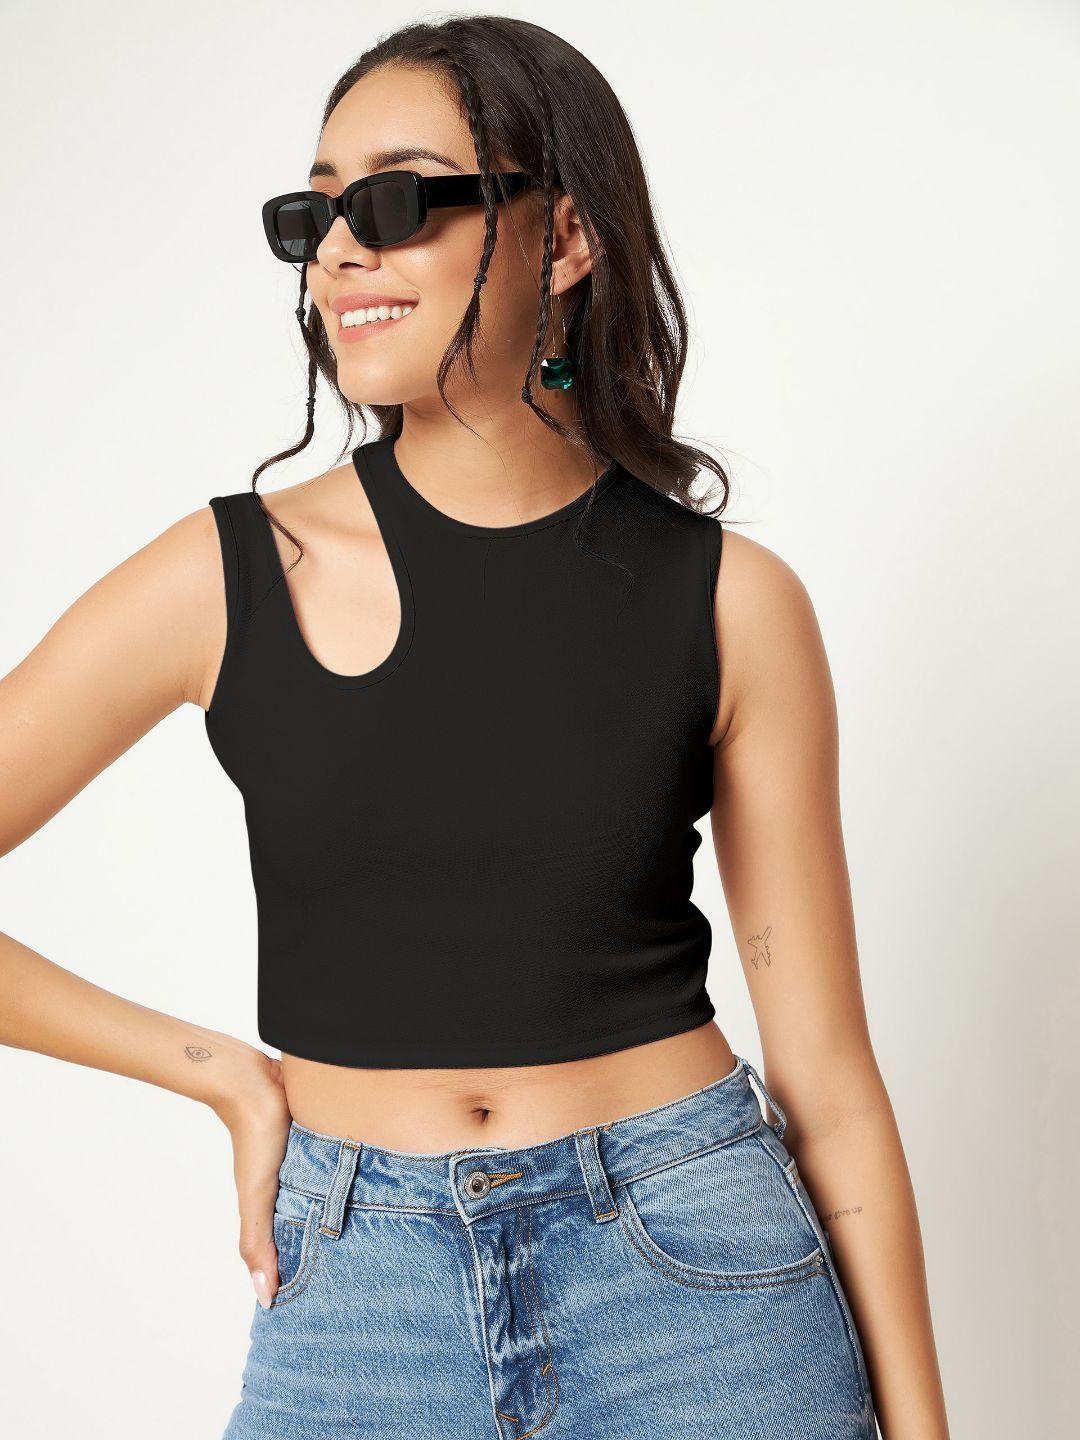 uptownie lite women stretchable high neck cut-out crop top